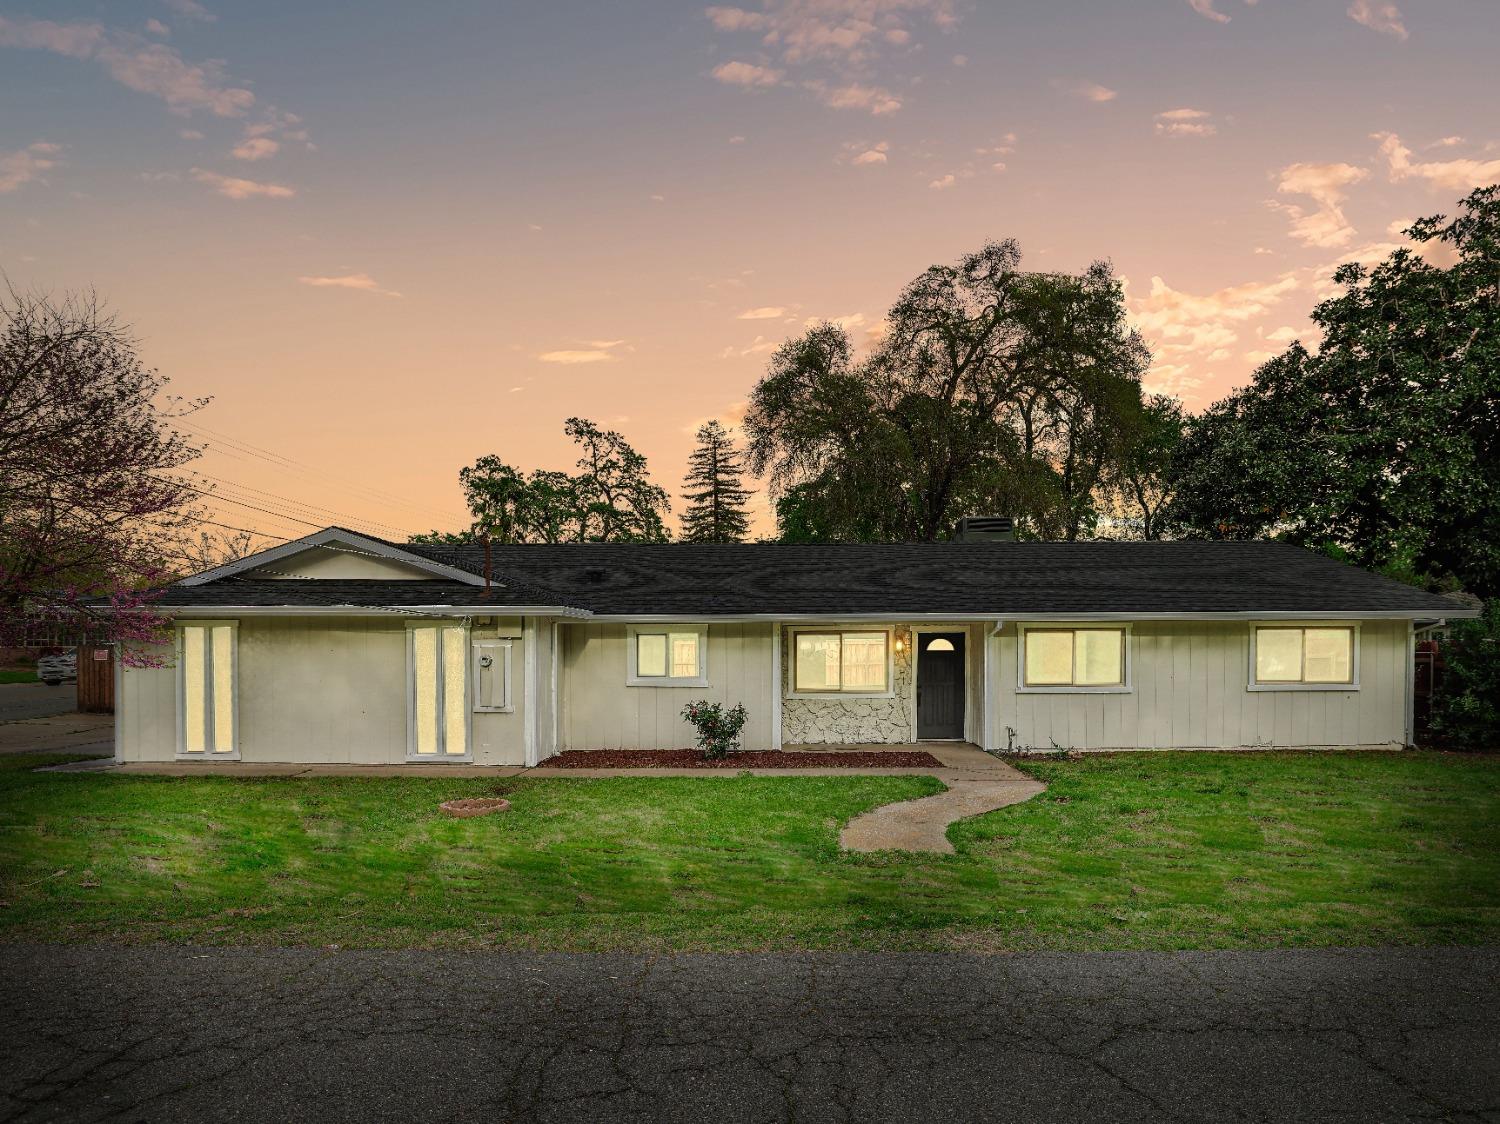 Photo of 5300 Kenneth Ave in Carmichael, CA